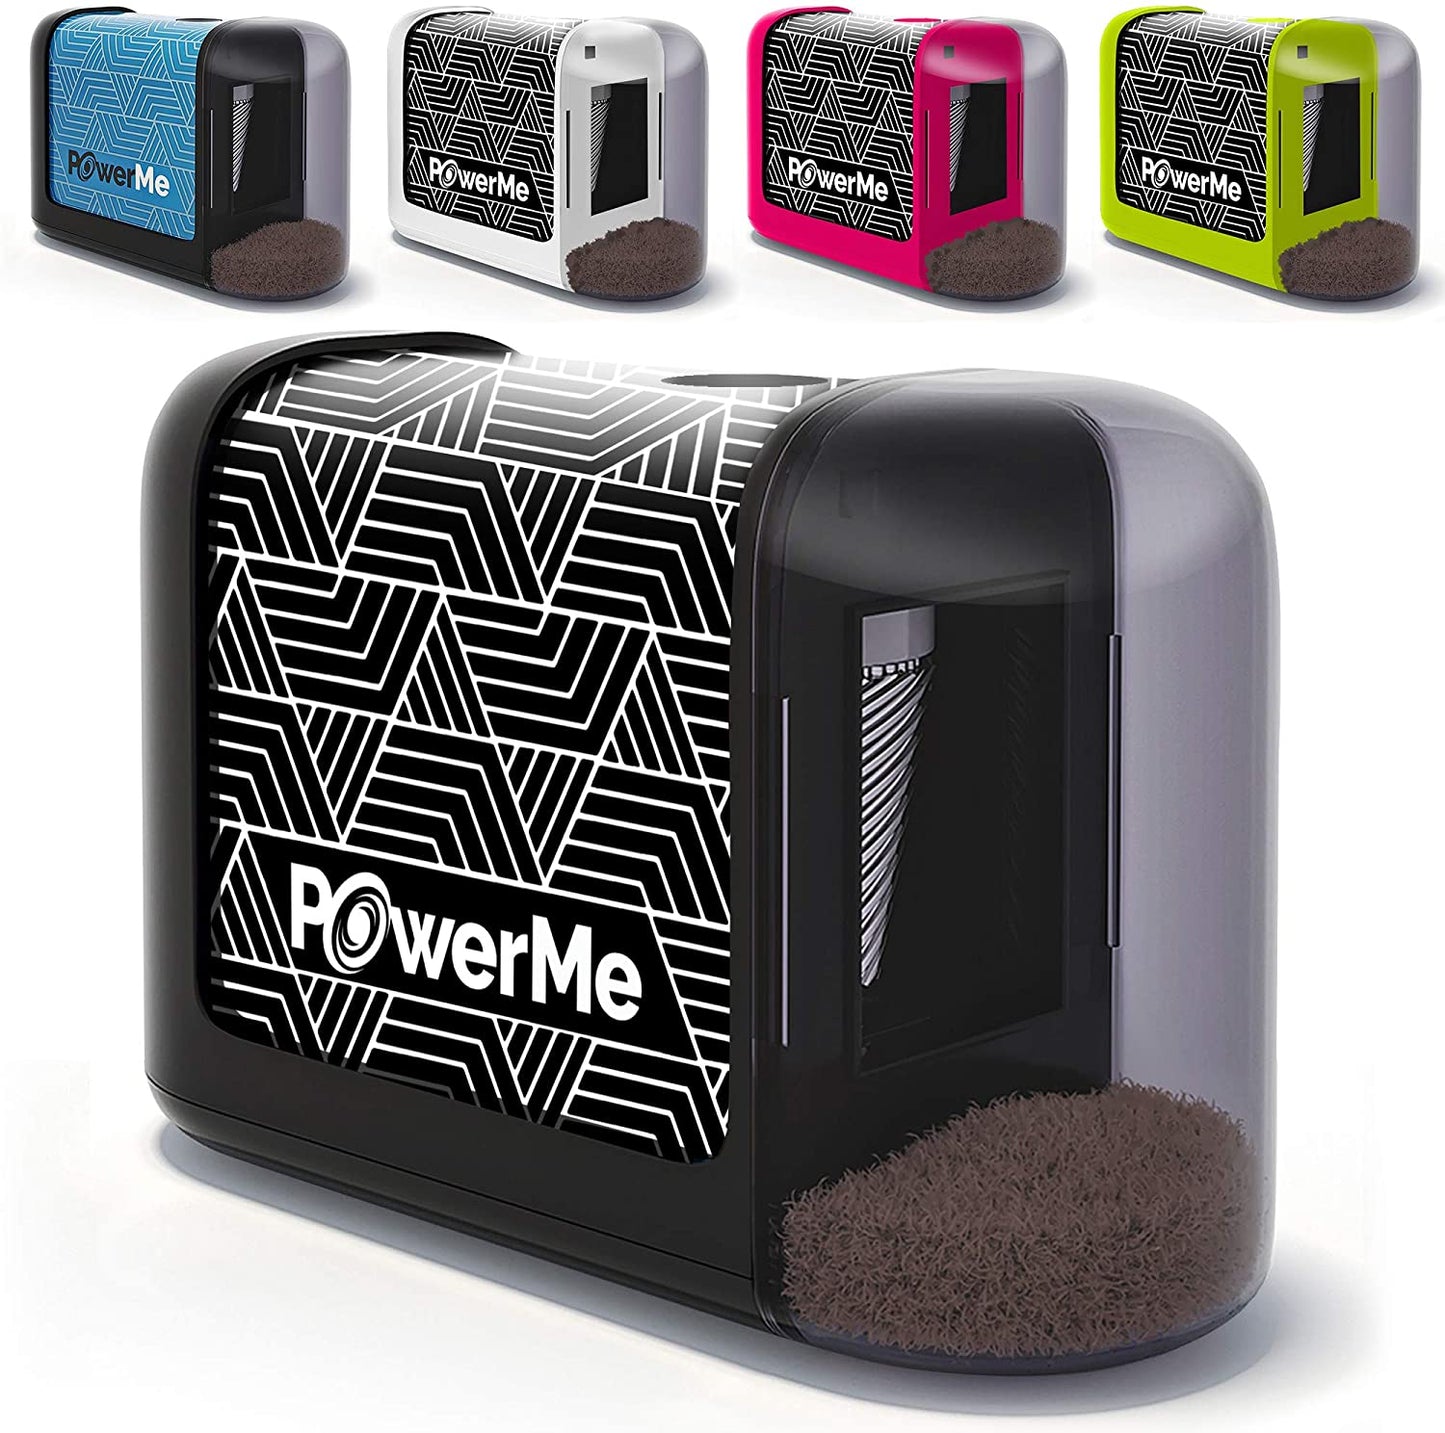 a group of different colored objects with text: 'PowerMe PowerMe PowerMe PowerMe PowerMe'